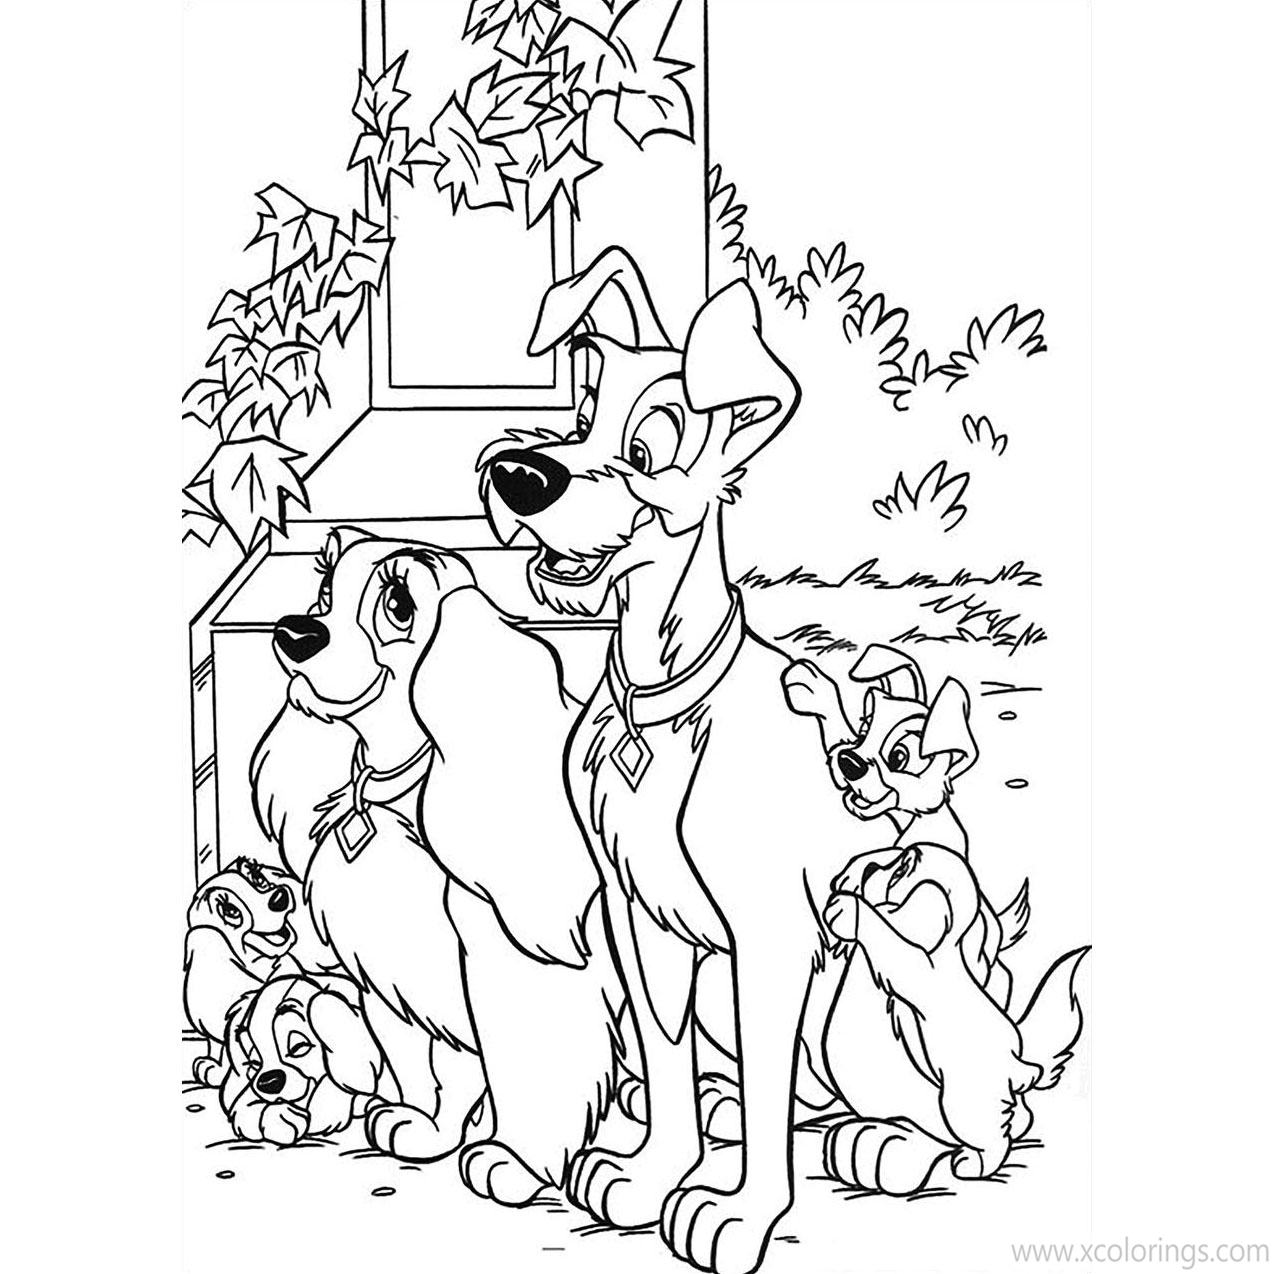 Free Lady and the Tramp Coloring Pages with Puppies printable